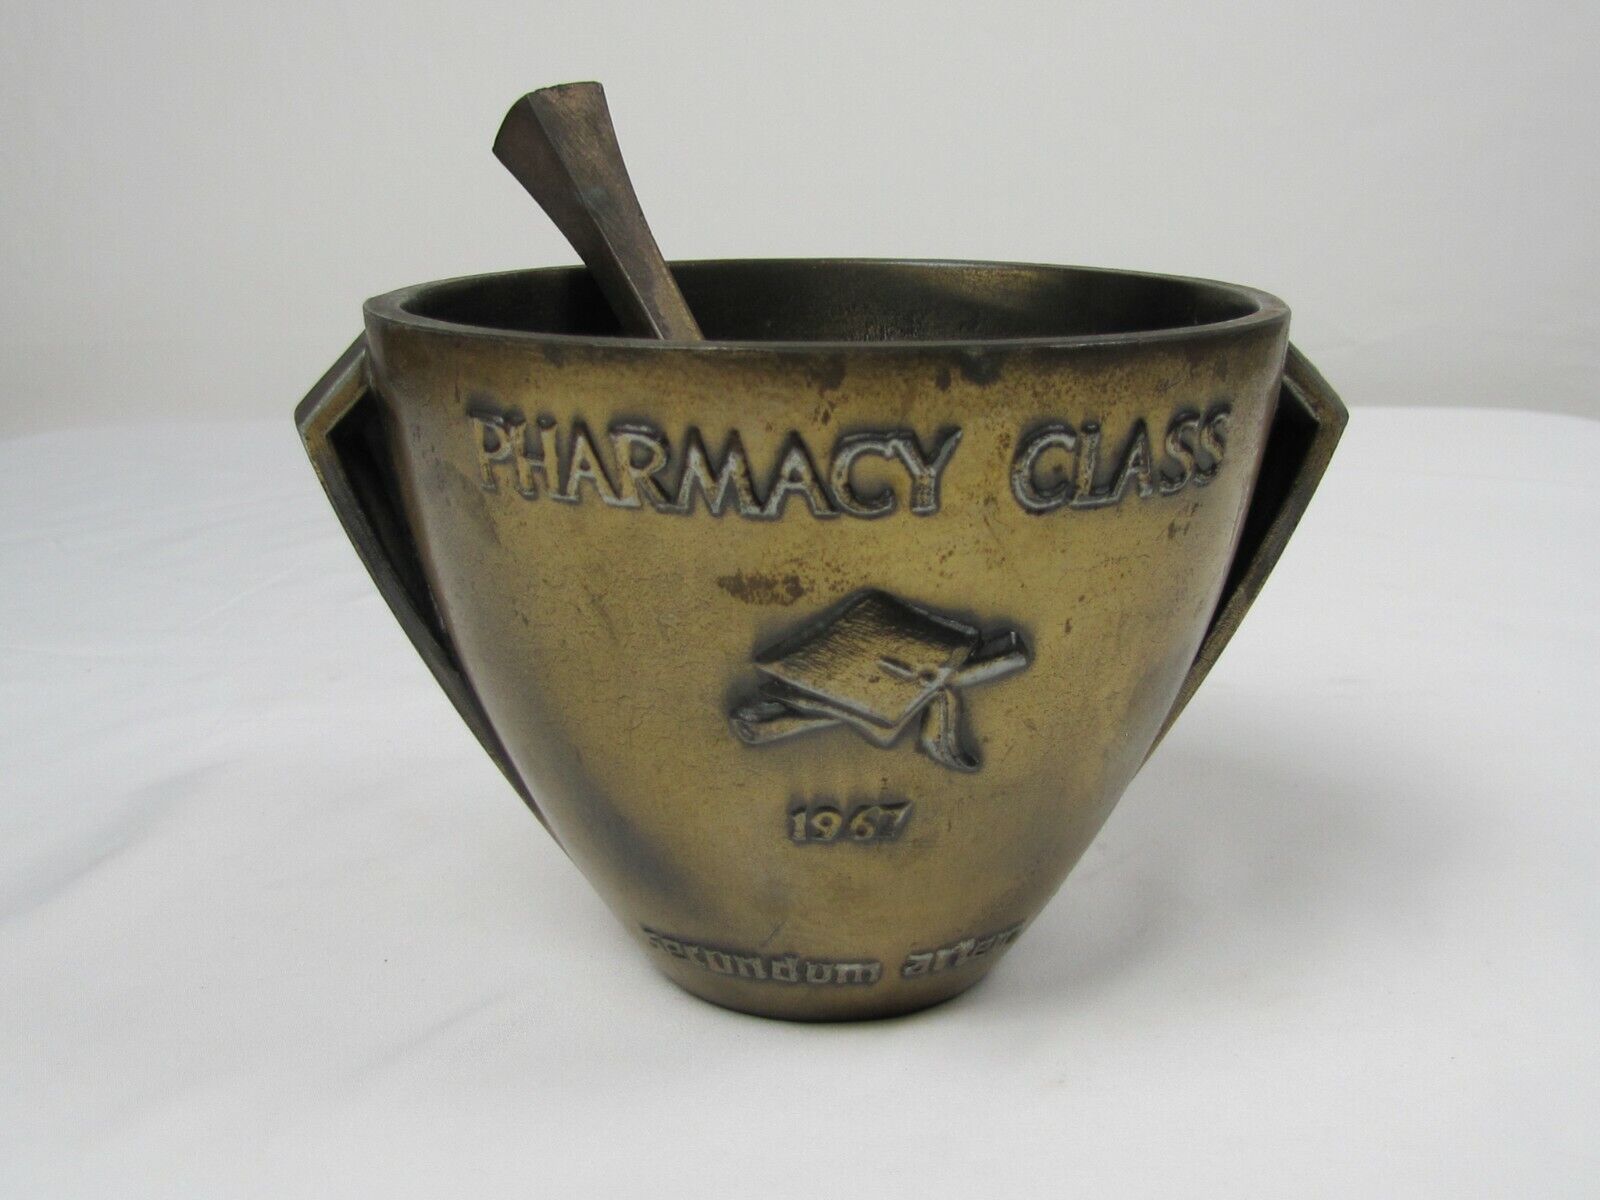 1967 Mortar and pestle from PHARMACY SCHOOL